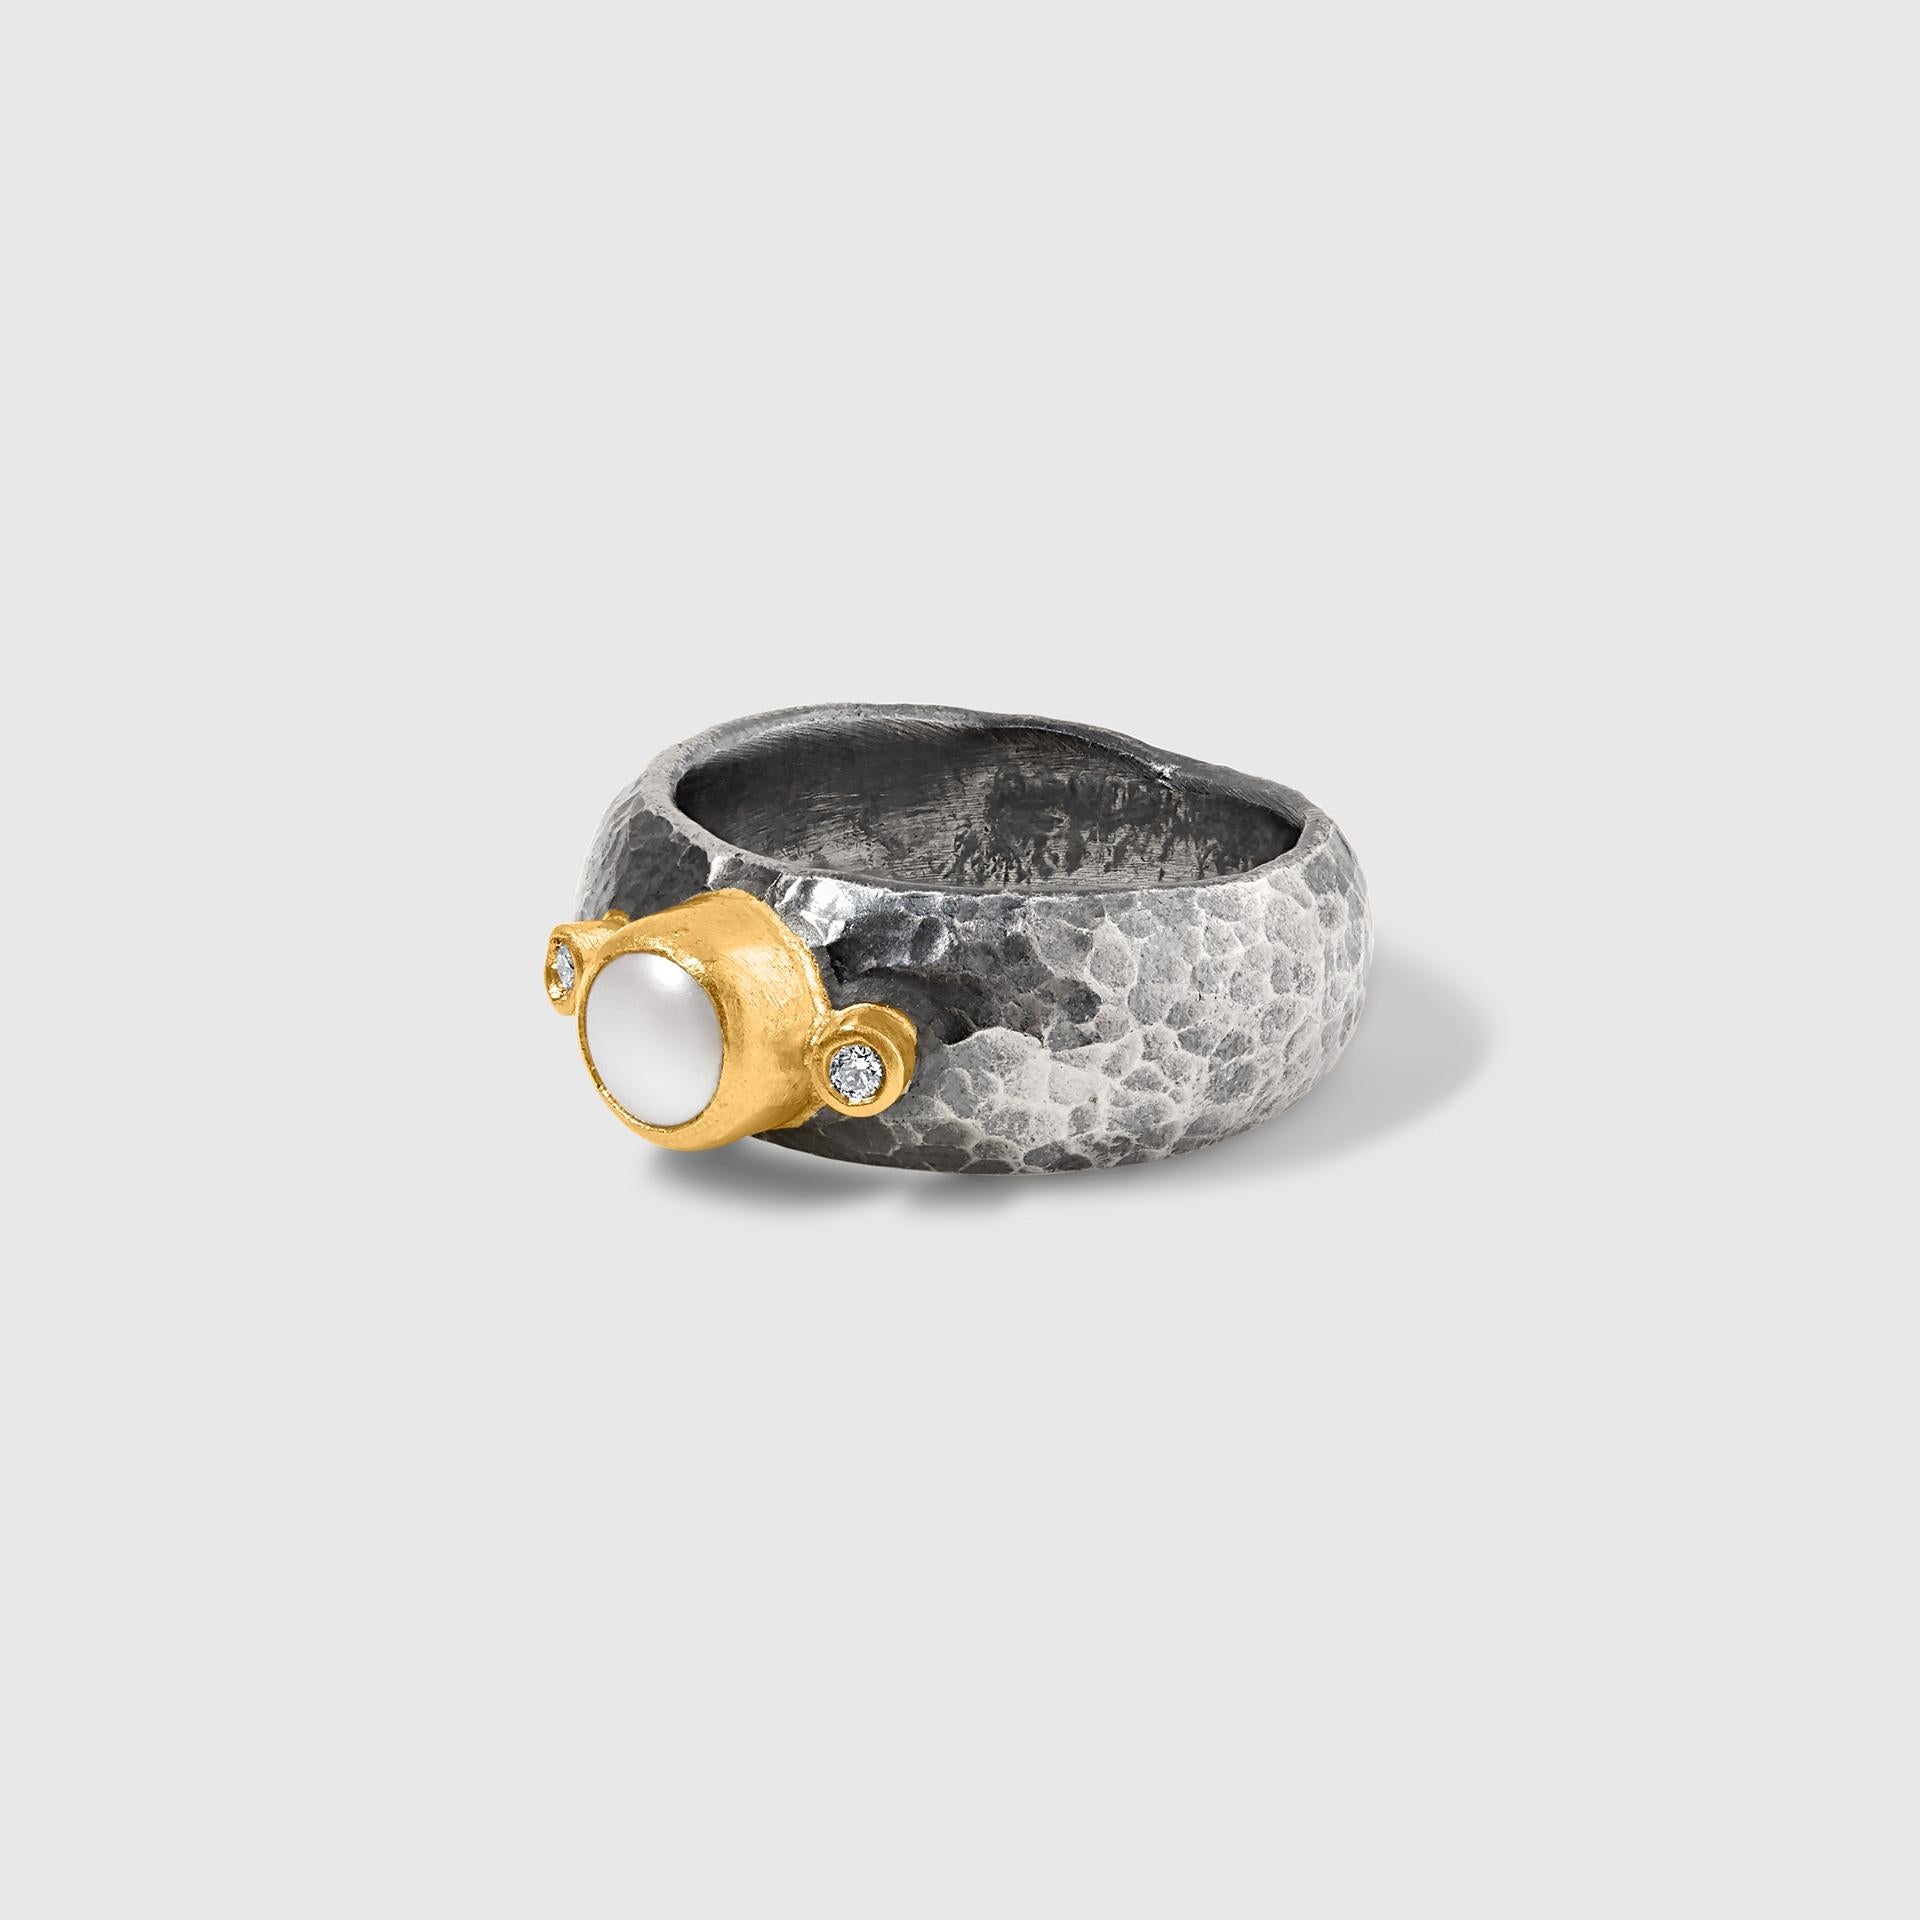 Contemporary Hammered Silver Ring with Pearl and Diamonds, 24kt Gold and Sterling Silver